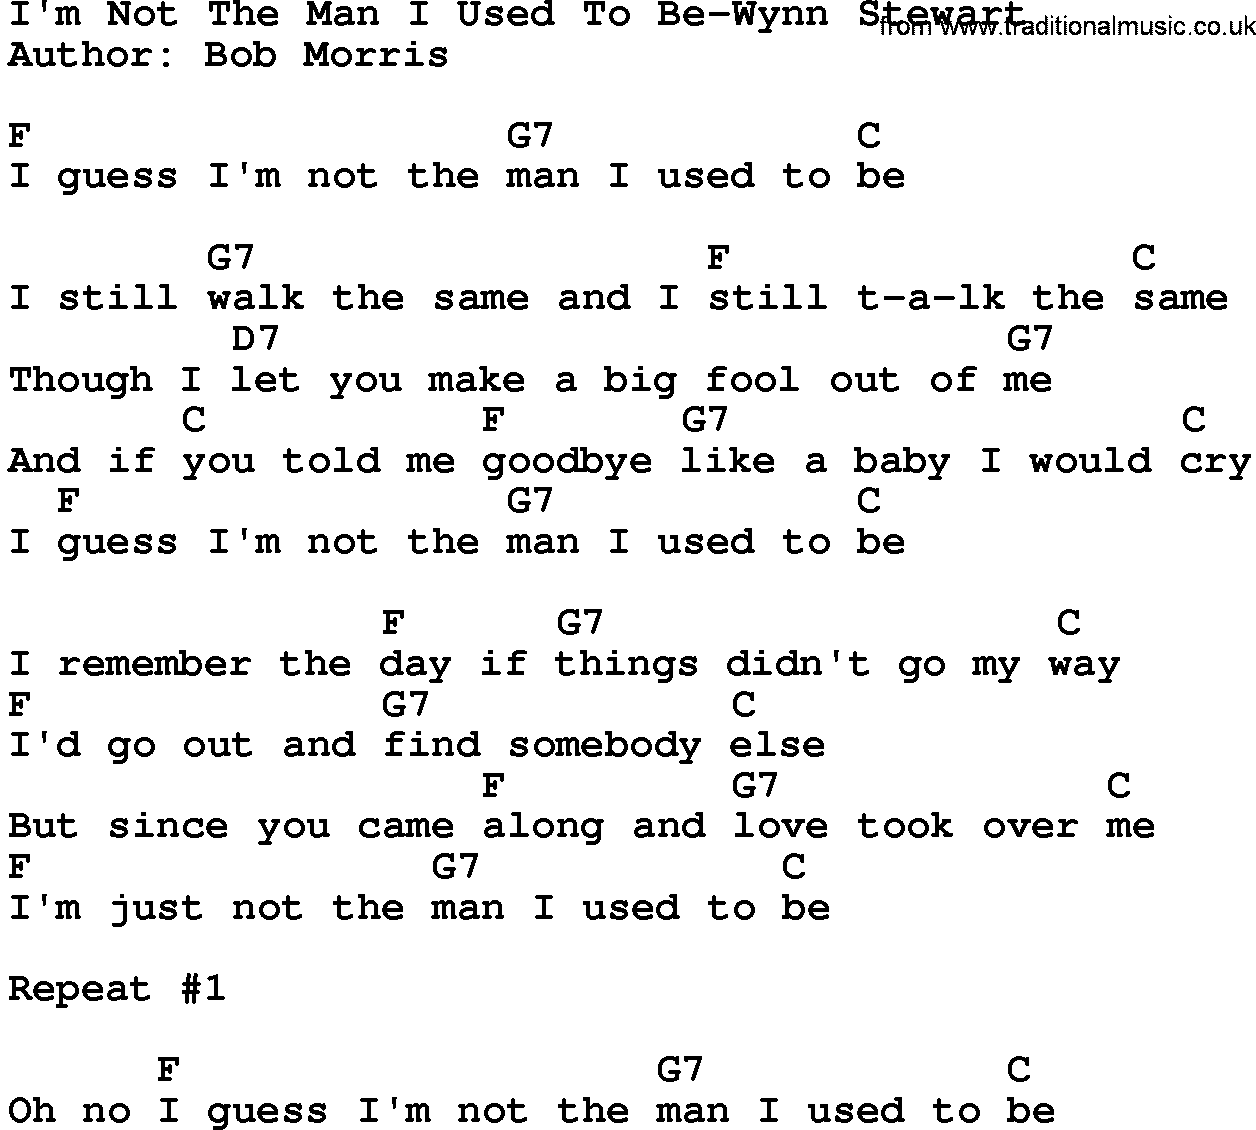 Country music song: I'm Not The Man I Used To Be-Wynn Stewart lyrics and chords